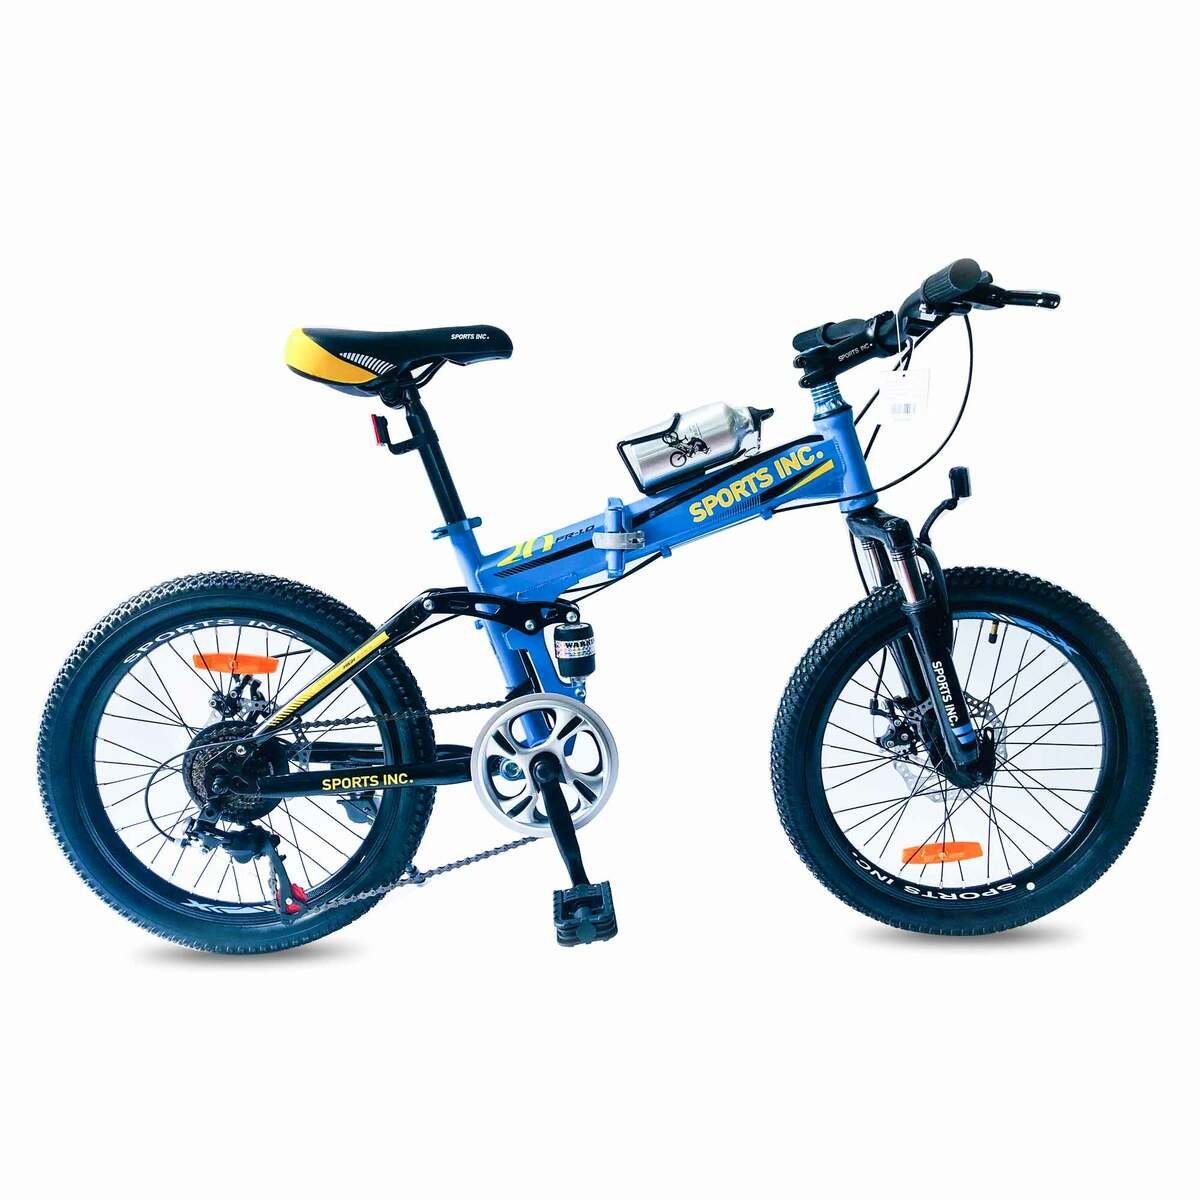 Sports INC Foldable Bicycle 20" SP005 Assorted Color & Design